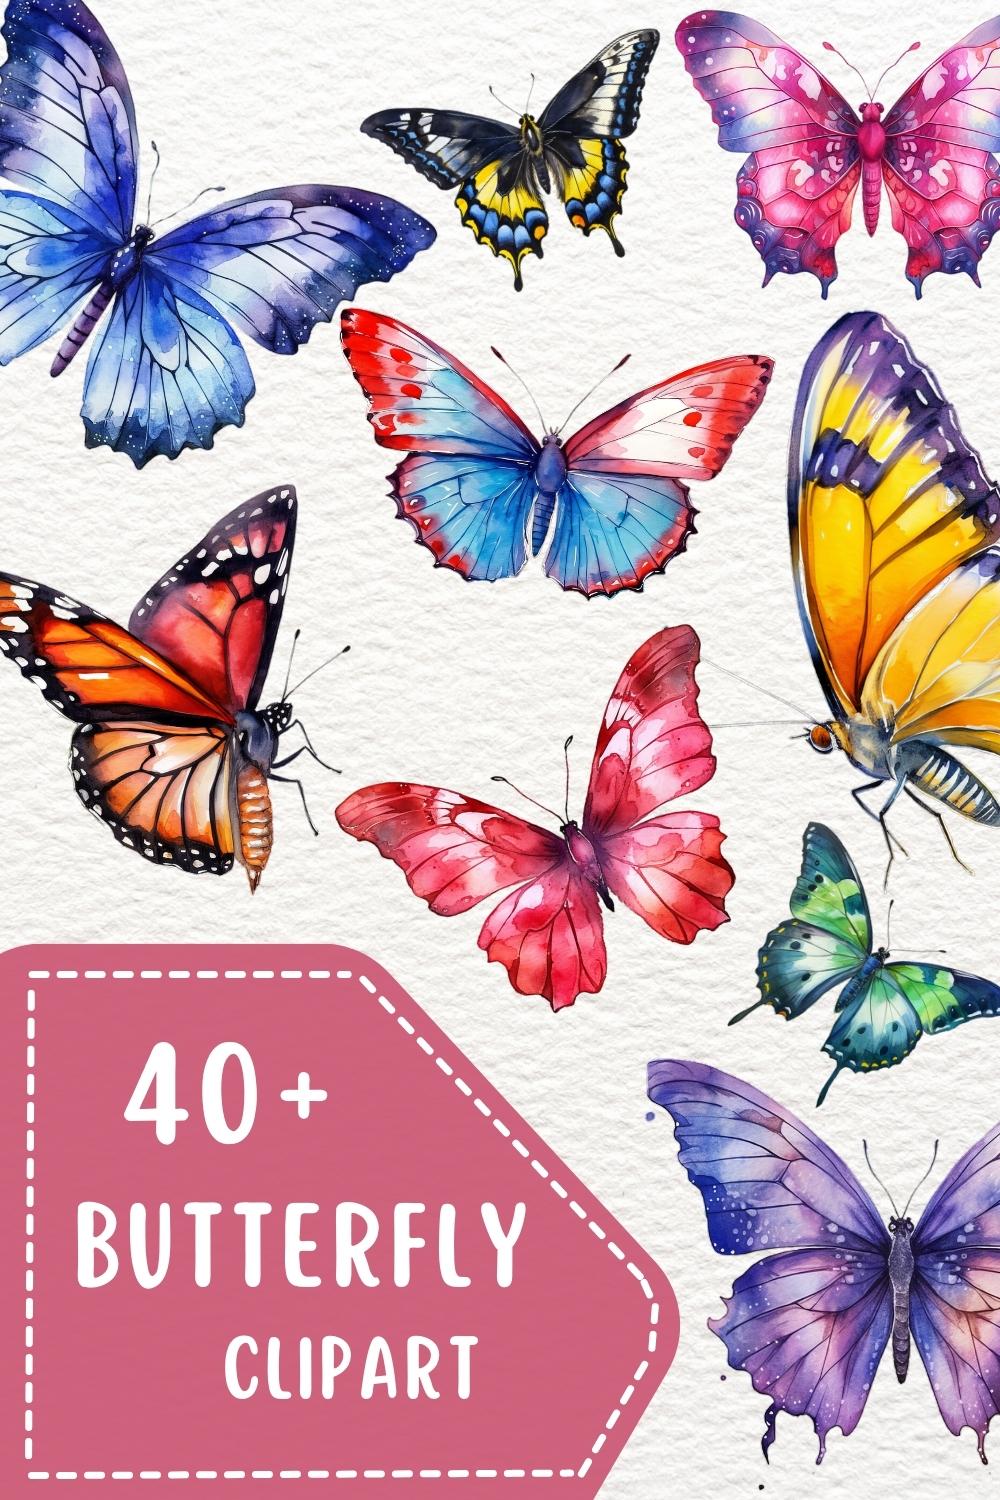 41 Watercolor Butterflies PNG, Butterfly Clipart, Transparent, Digital Paper Craft, illustrations, watercolor clipart, Digital Paper Craft pinterest preview image.